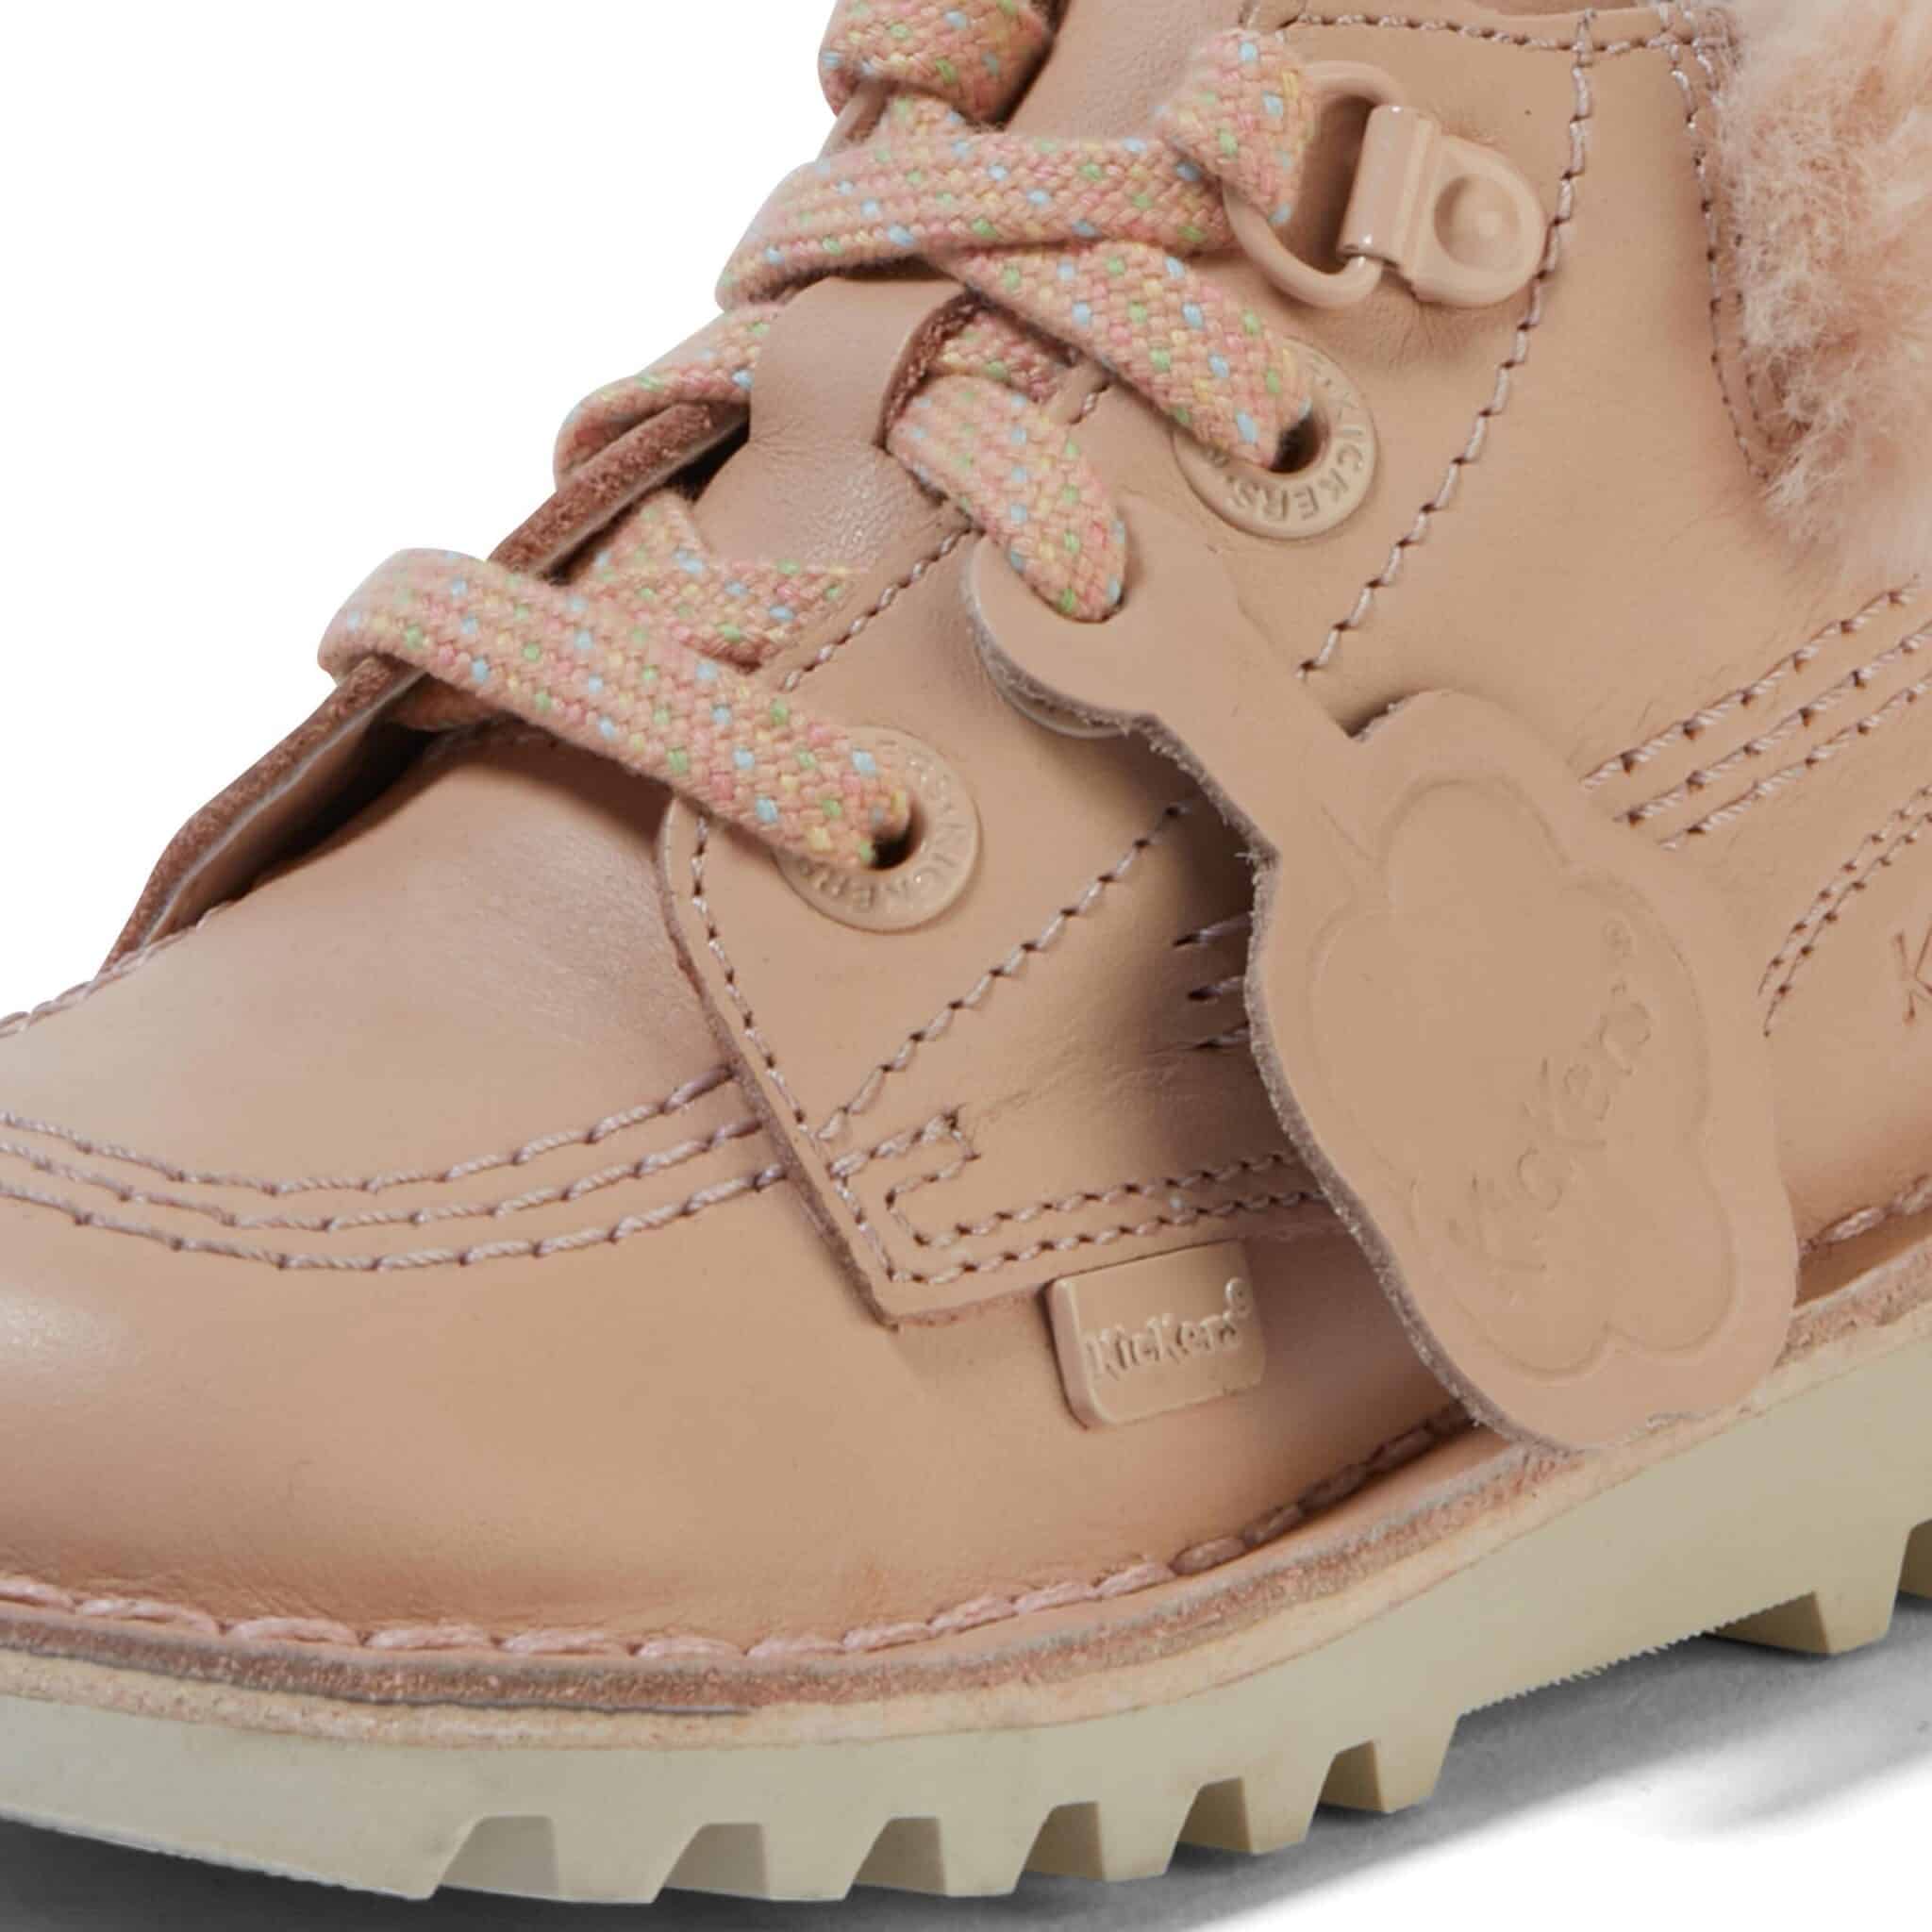 kickers tan leather high top boys warm boots